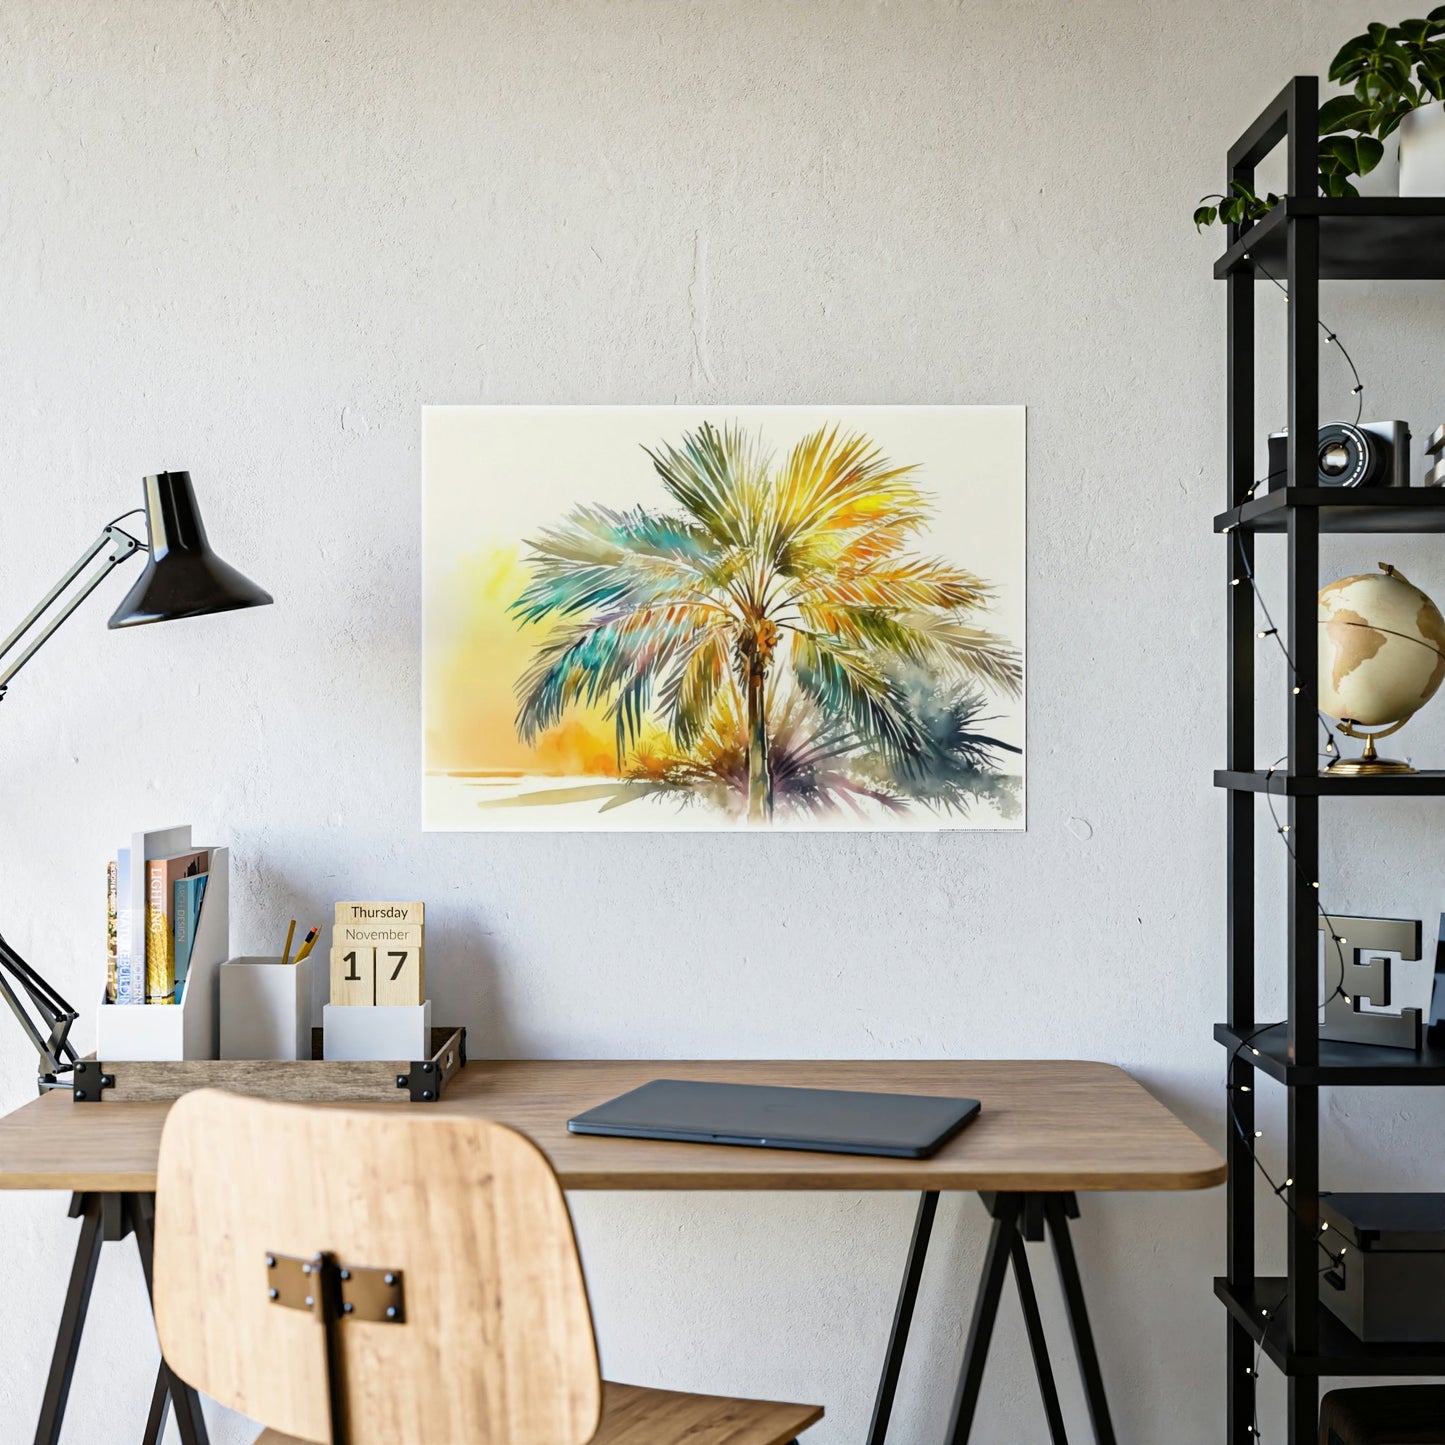 Framed Canvas Print of Palm Trees: Bringing the Tropics Indoors